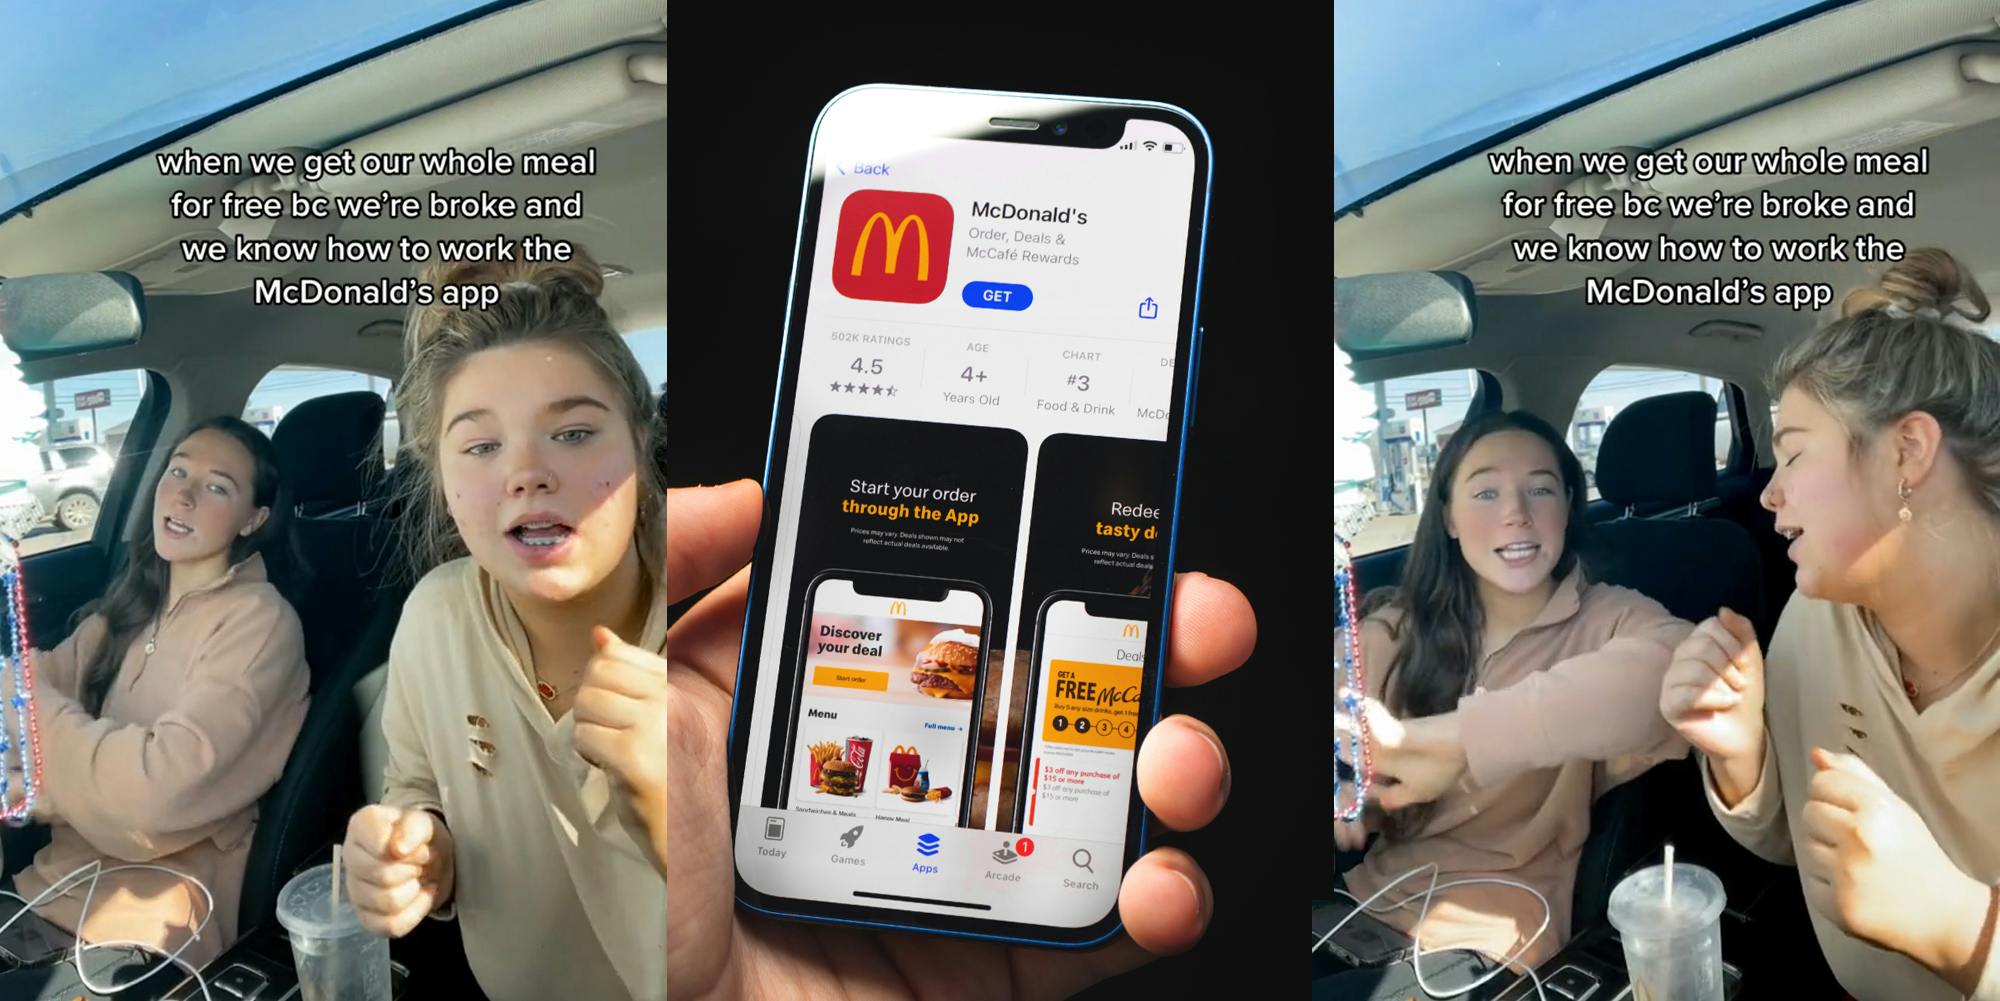 women in car dancing with caption "when we get our whole meal for free bc we're broke and we know how to work the McDonald's app" (l) hand holding McDonald's app in appstore in front of black background (c) women in car dancing with caption "when we get our whole meal for free bc we're broke and we know how to work the McDonald's app" (r)